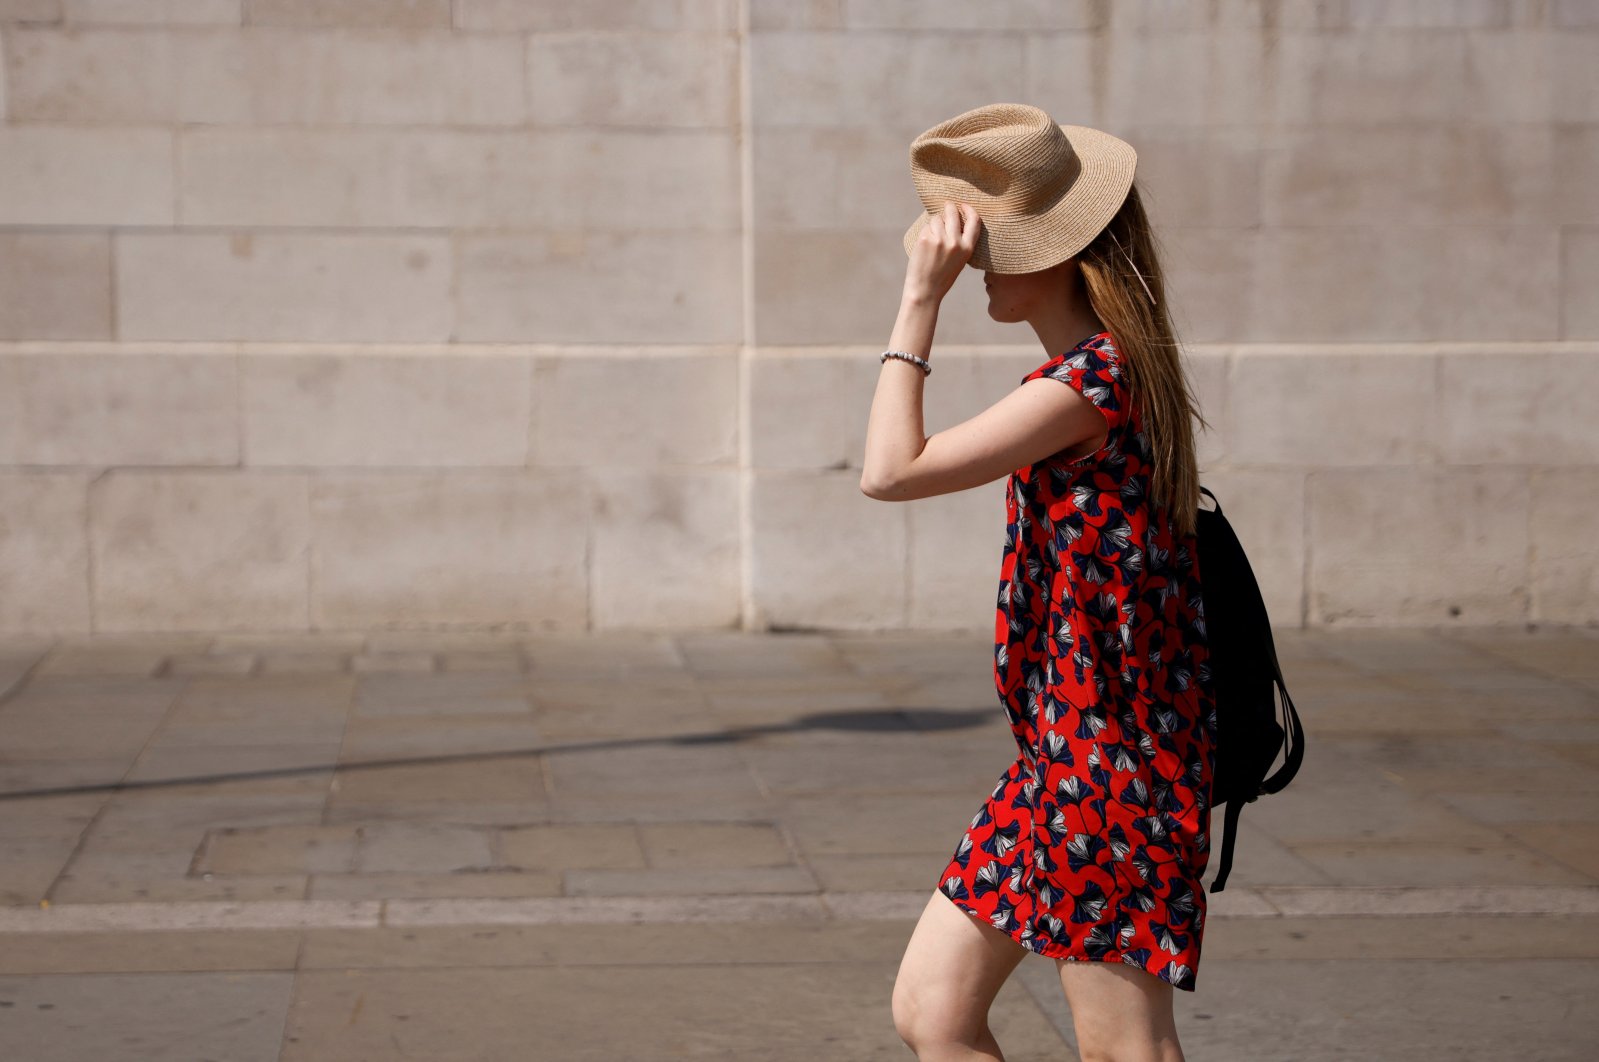 A woman uses a hat to shield her face from the sun in Trafalgar Square during the hot weather in London, Britain, July 18, 2022. (Reuters Photo)